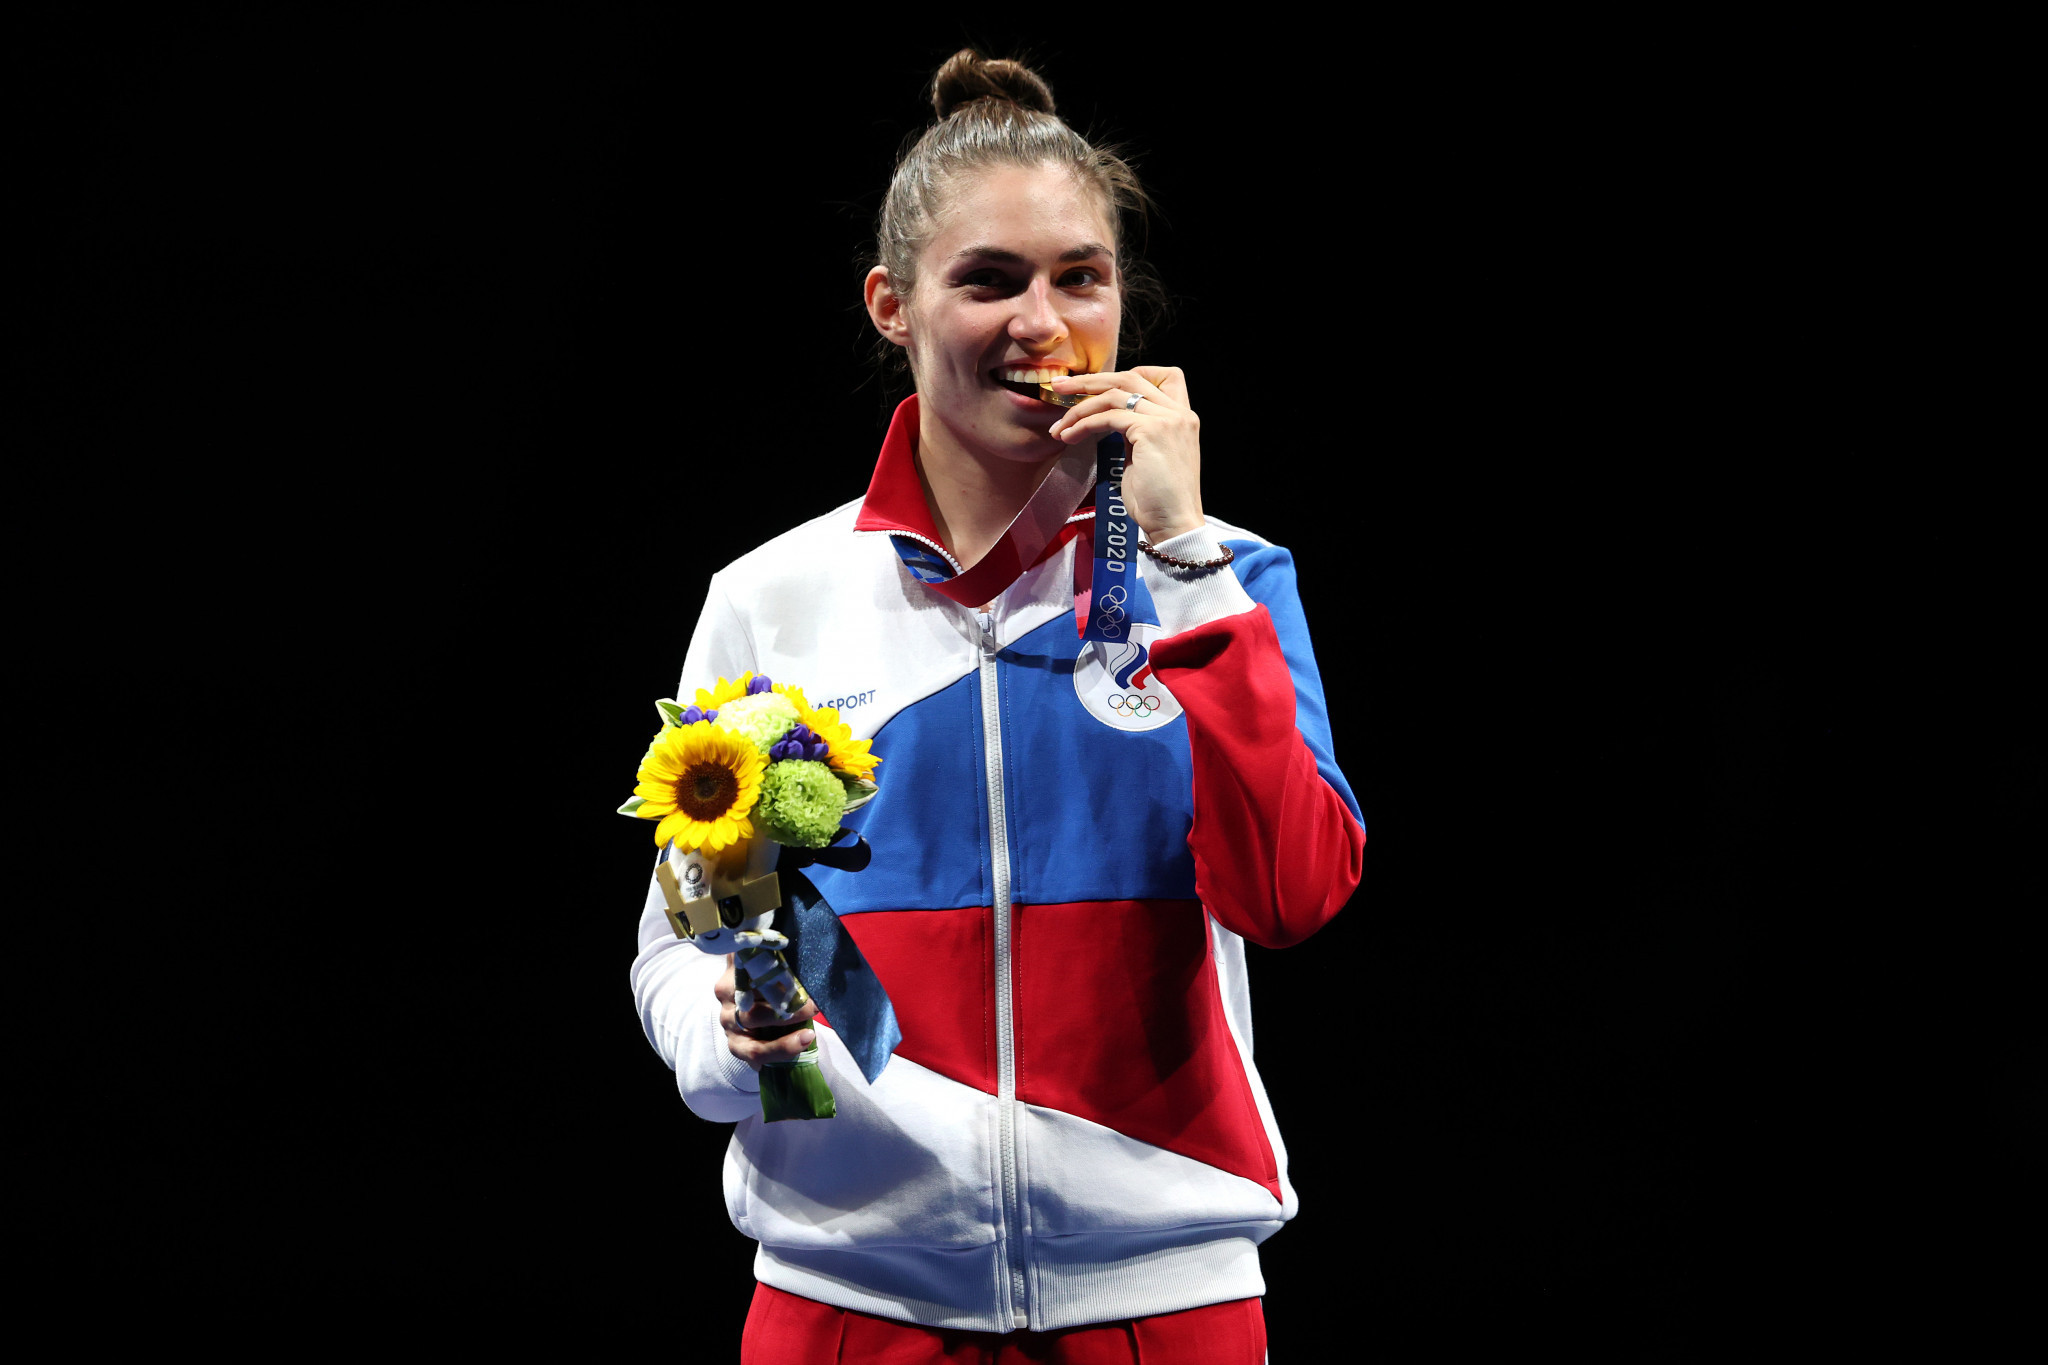 Double Olympic champion Sofia Pozdniakova is a Russian Armed Forces athlete and has been banned by the FIE which cites the IOC recommendations for its decision ©Getty Images